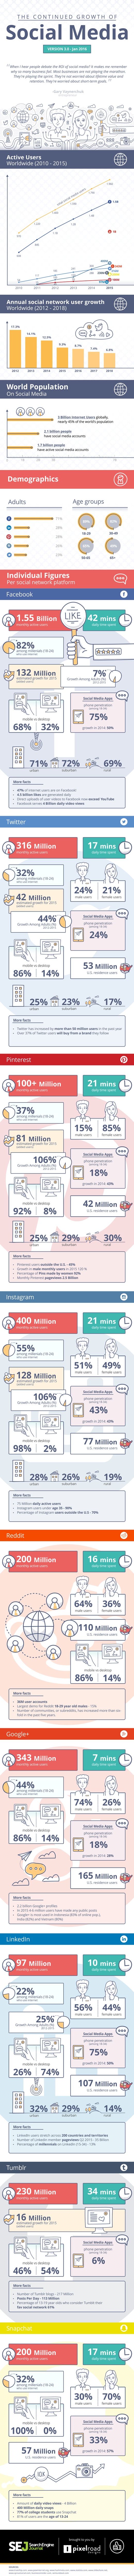 The Continued Growth of Social Media (Infographic)